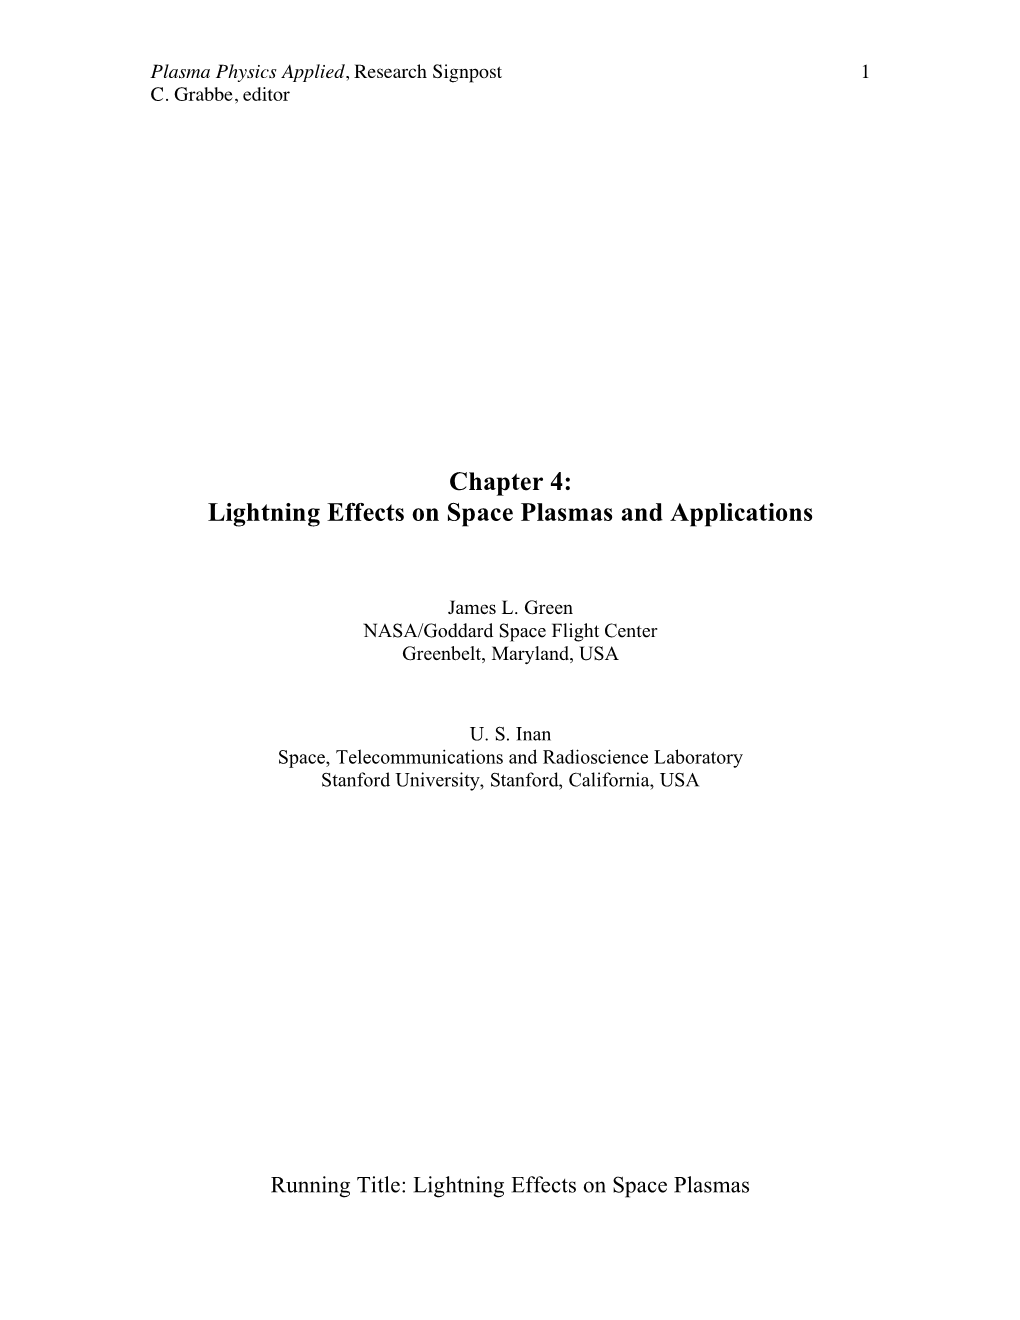 Lightning Effects on Space Plasmas and Applications